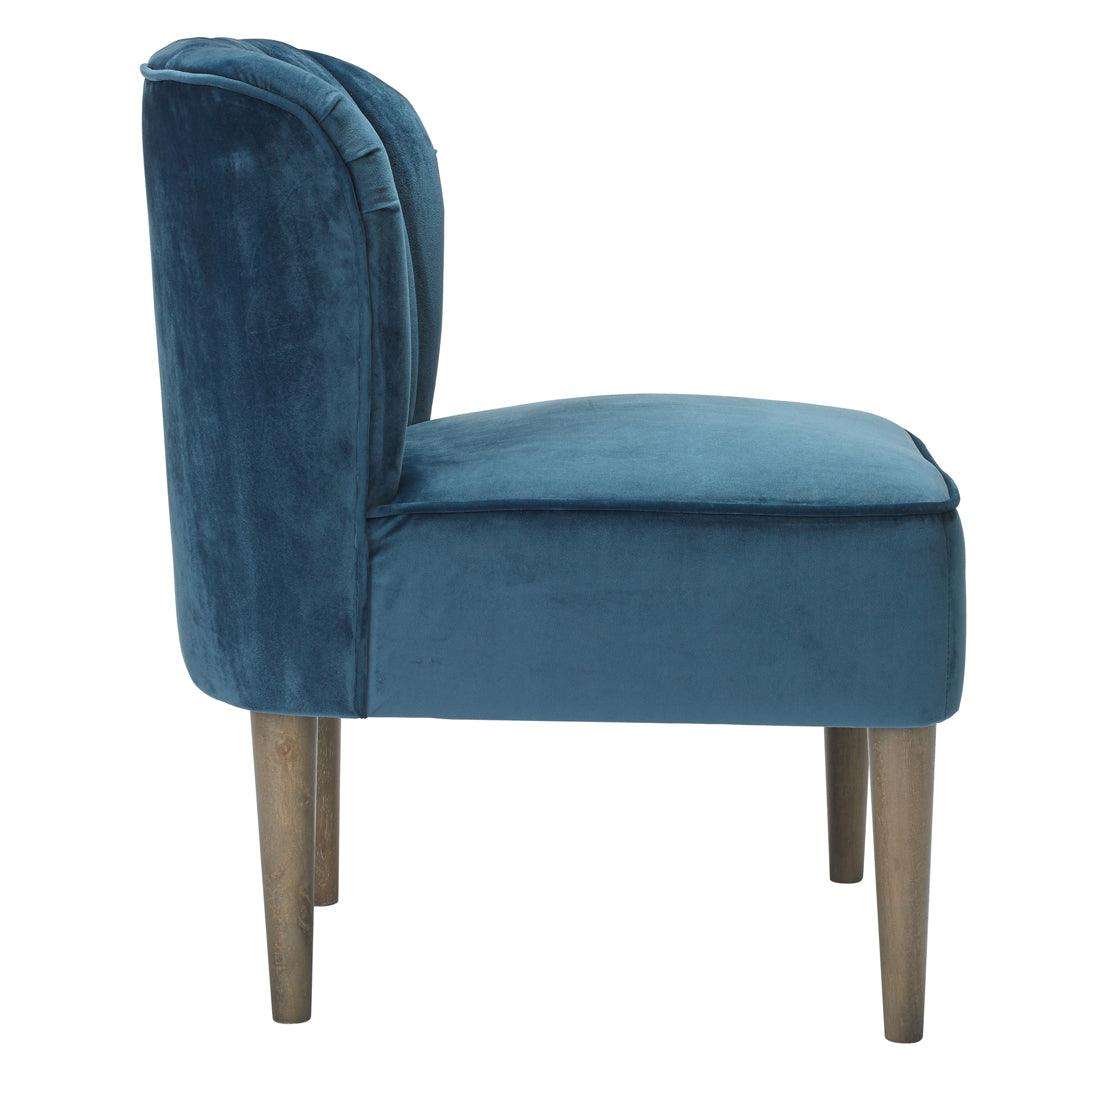 Bella Chair Midnight Blue - loveyourbed.co.uk